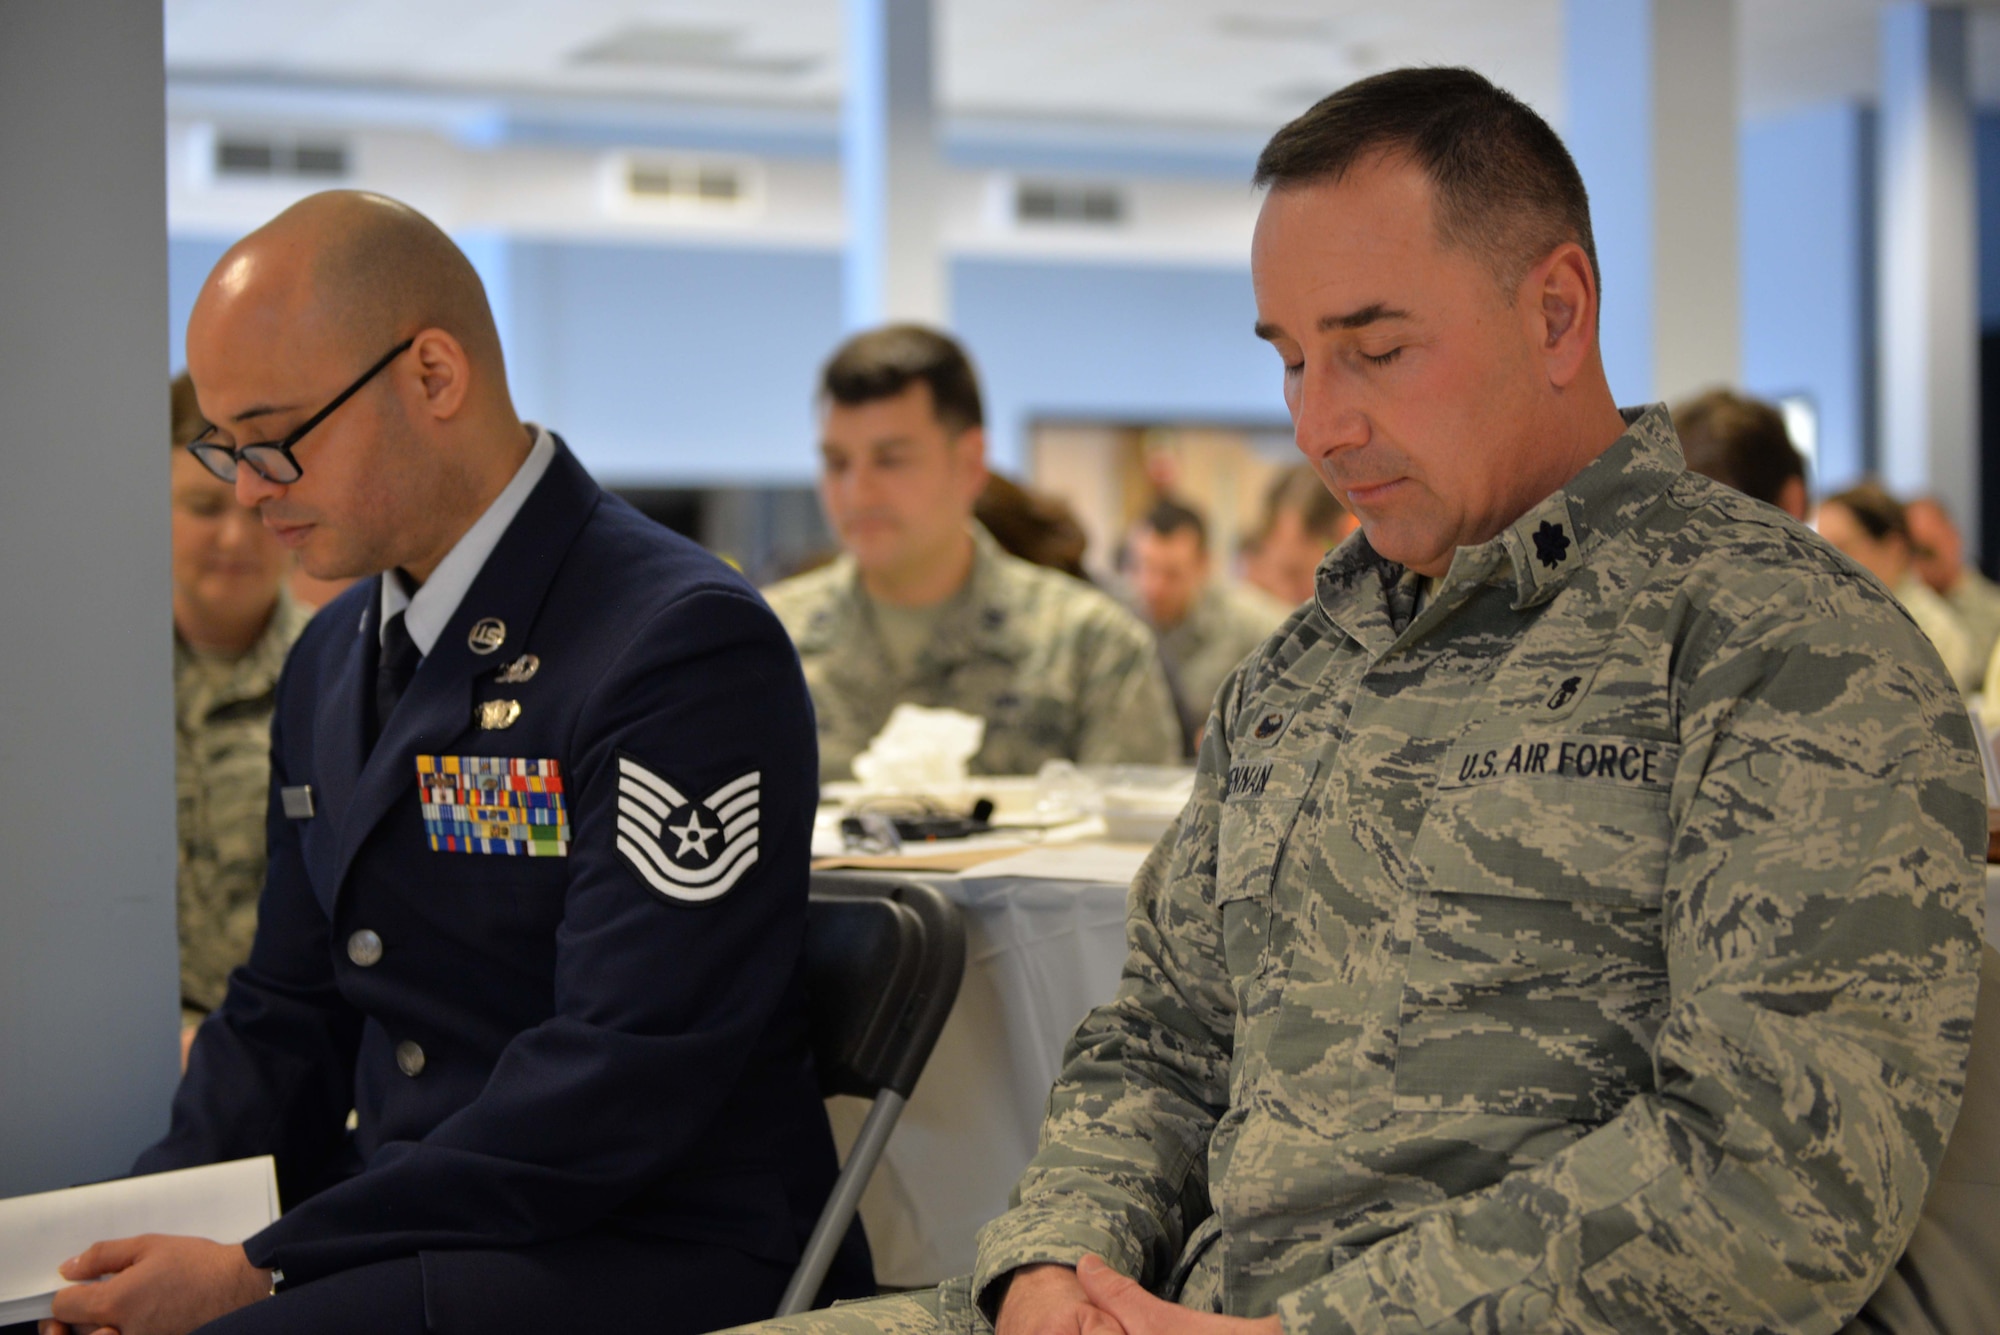 From the left, Tech. Sgt. Siddartha Sosa Rodriguez, a member of the 157th Air Refueling Wing Chaplin’s Corps, and Lt. Col. Fred Brennan, 157th Medical Group commander, bow their heads during a prayer for the nation at the Commanders Annual Prayer Breakfast, April 2, 2017, Pease Air National Guard Base, N.H.(N.H. Air National Guard Photo by Senior Airman  Ashlyn J. Correia)